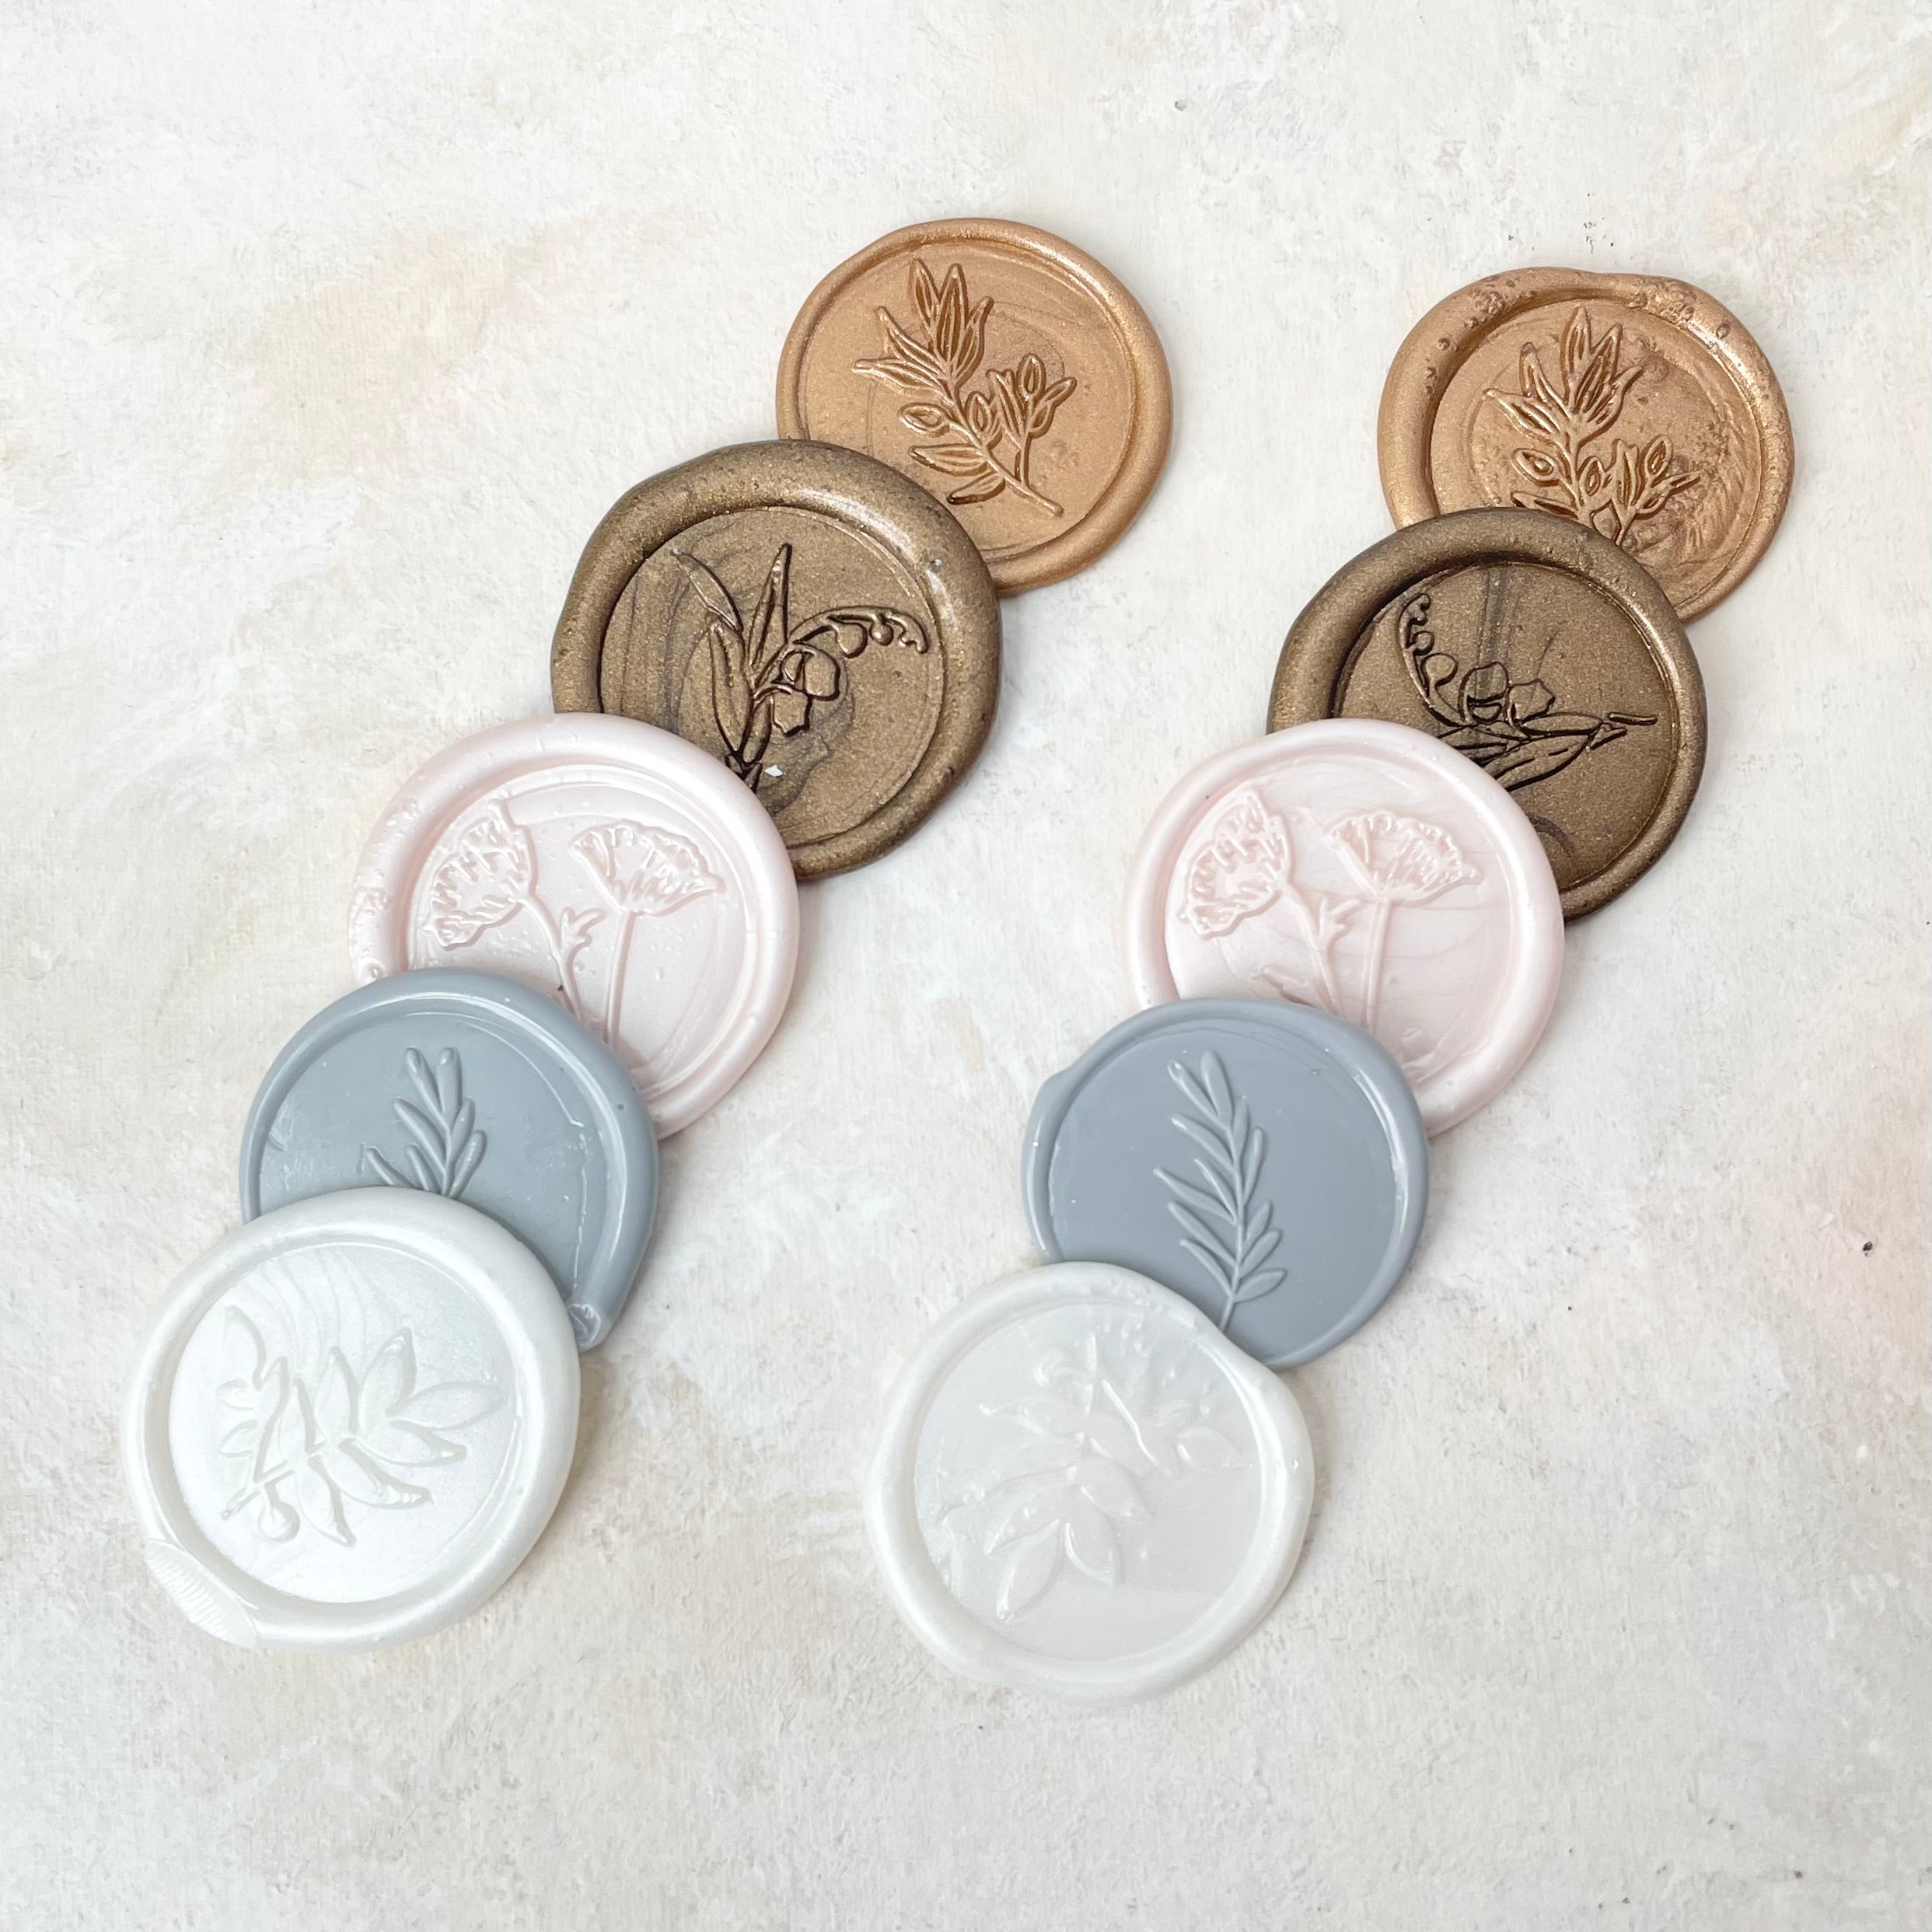 10 wax seals with leaf & floral design  - Wedding Flat lay props from Champagne & GRIT